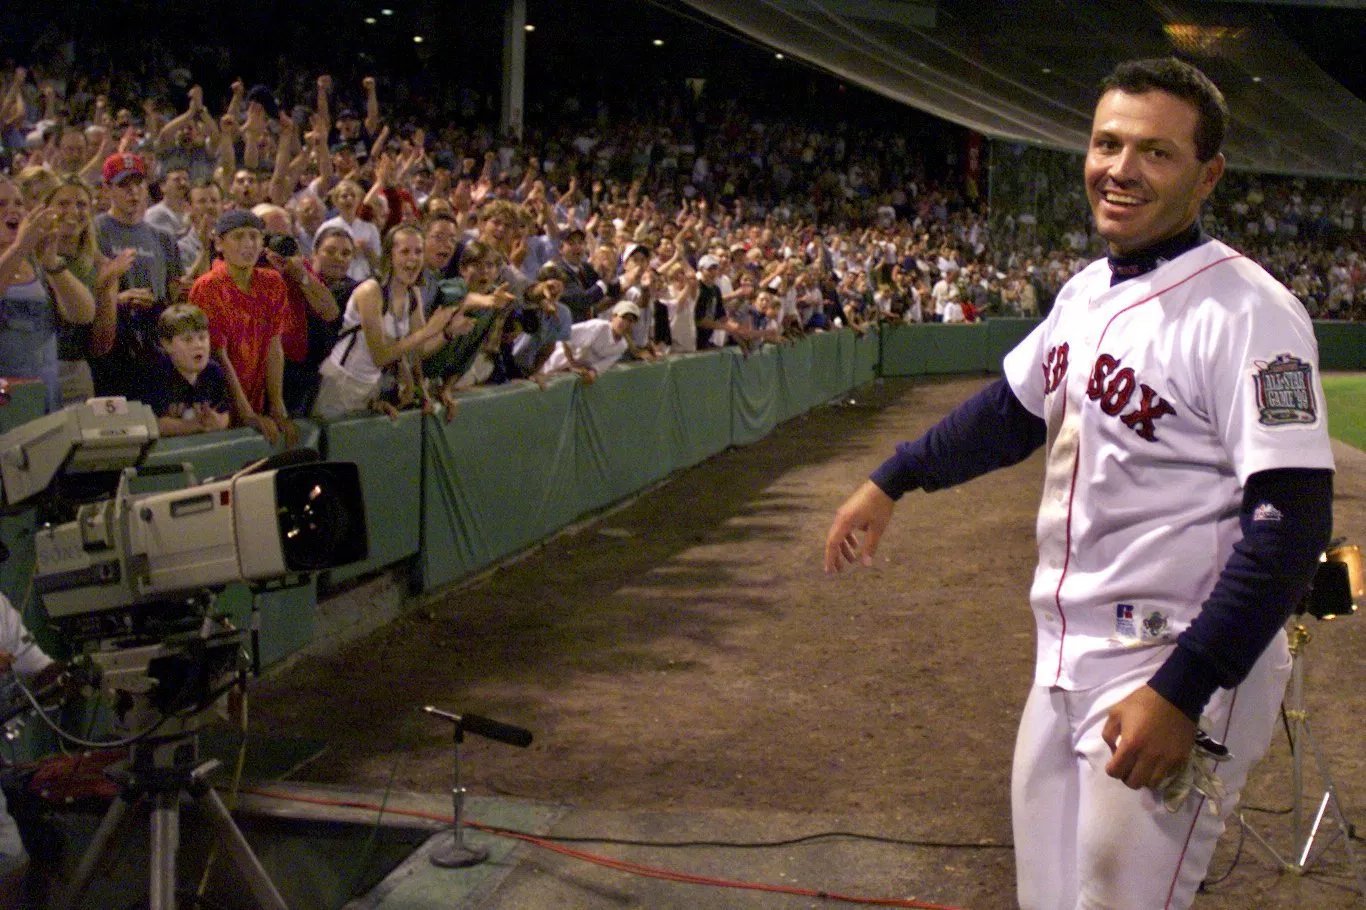 Happy birthday to Brian Daubach, who hit 86 homers for the Red Sox, including 2 for the 2004 squad 